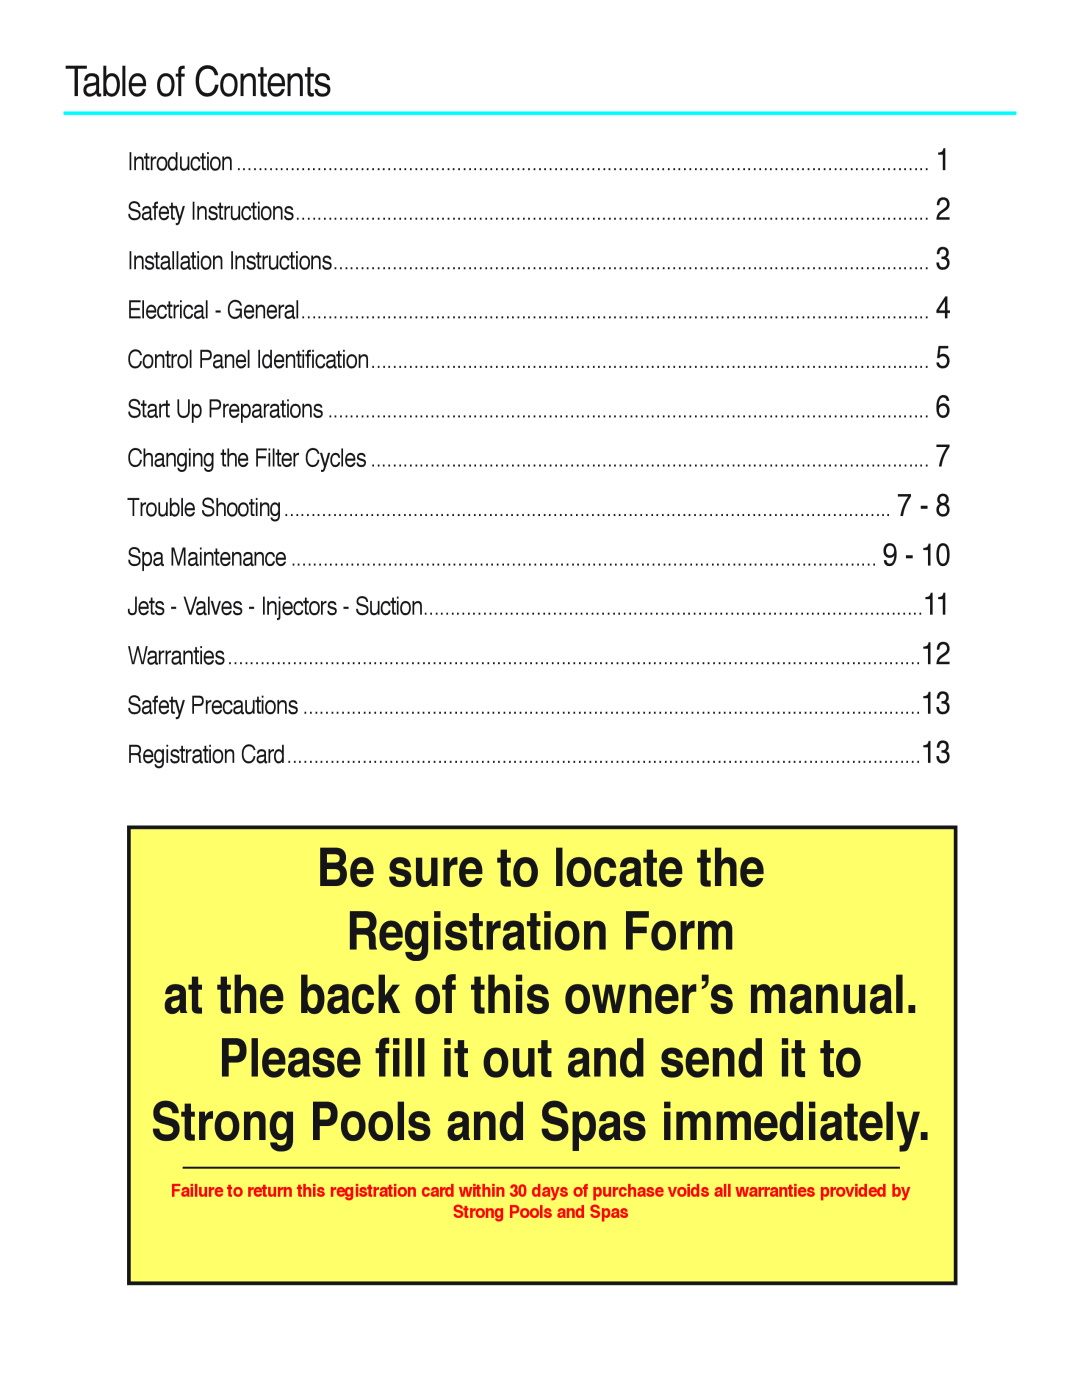 Strong Pools and Spas The Antigua Table of Contents, Be sure to locate the Registration Form, Strong Pools and Spas 